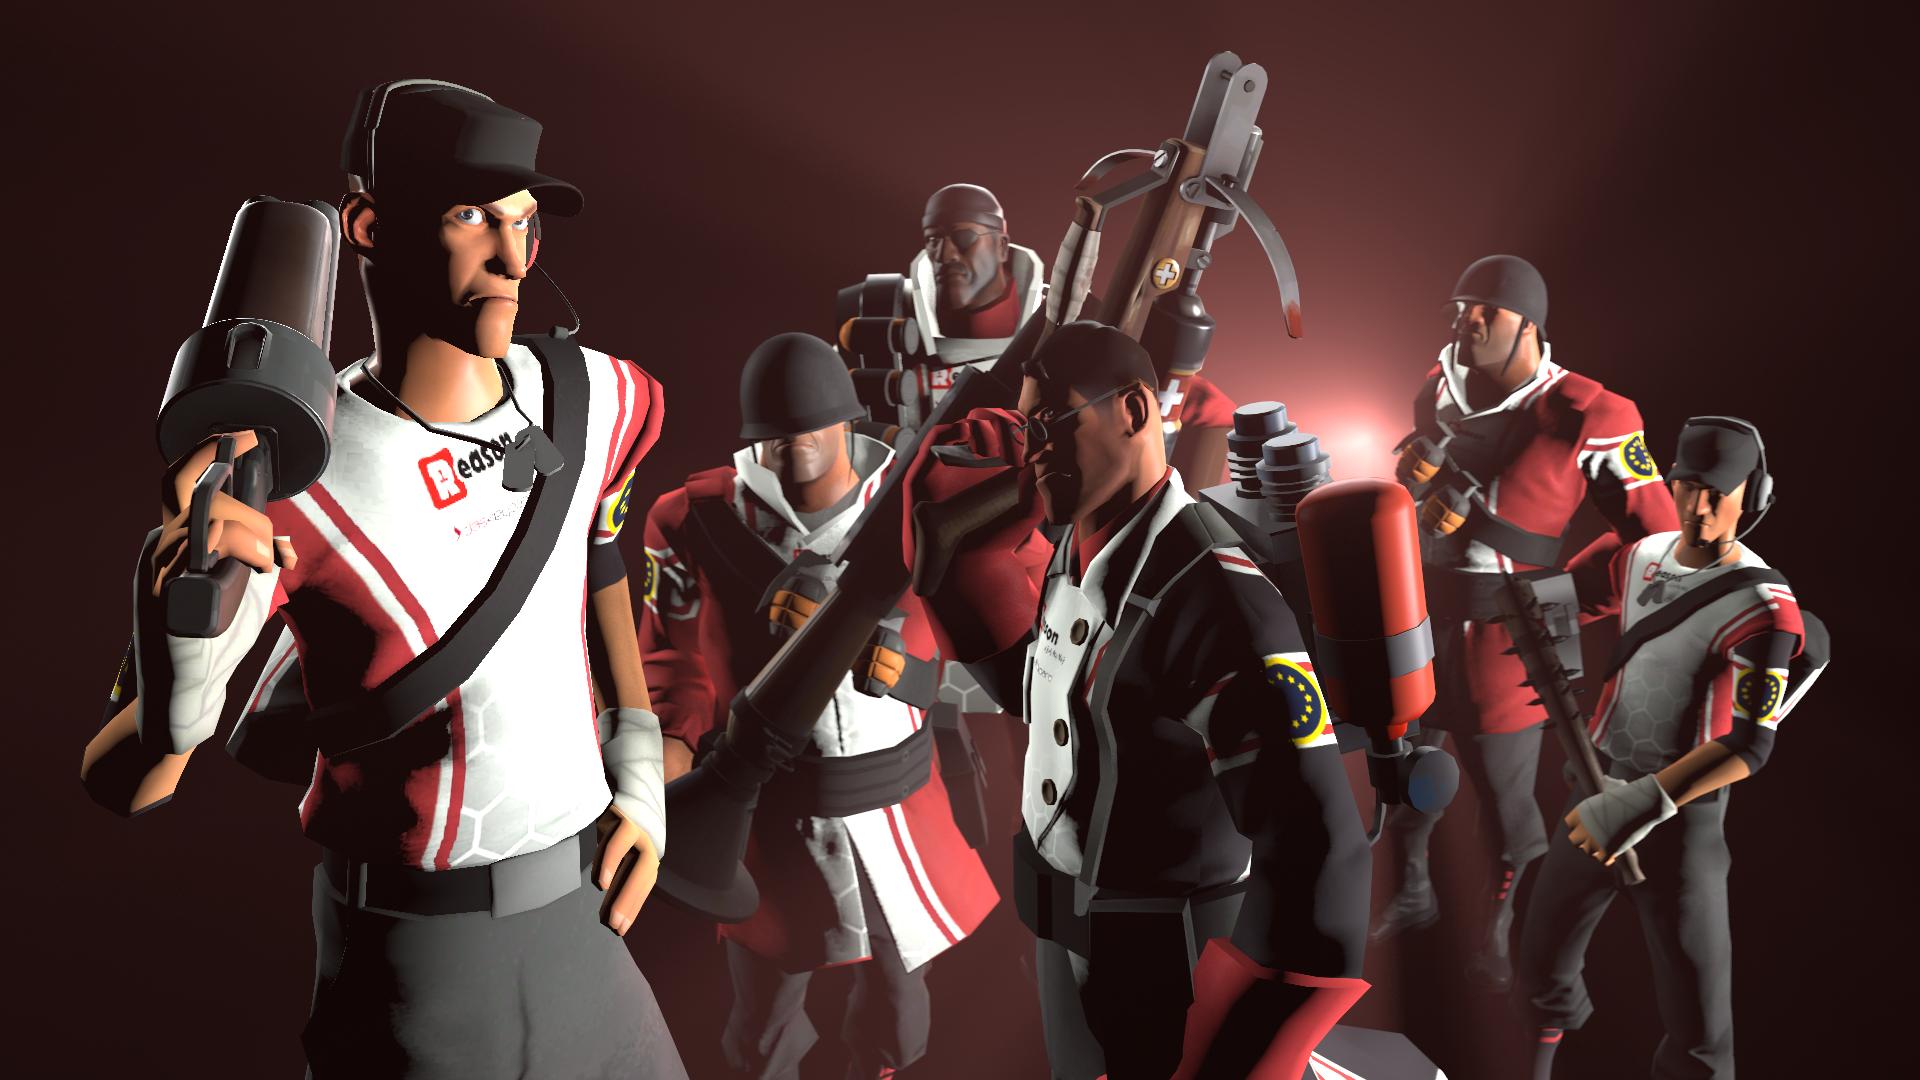 Team Fortress 2 at iSeries